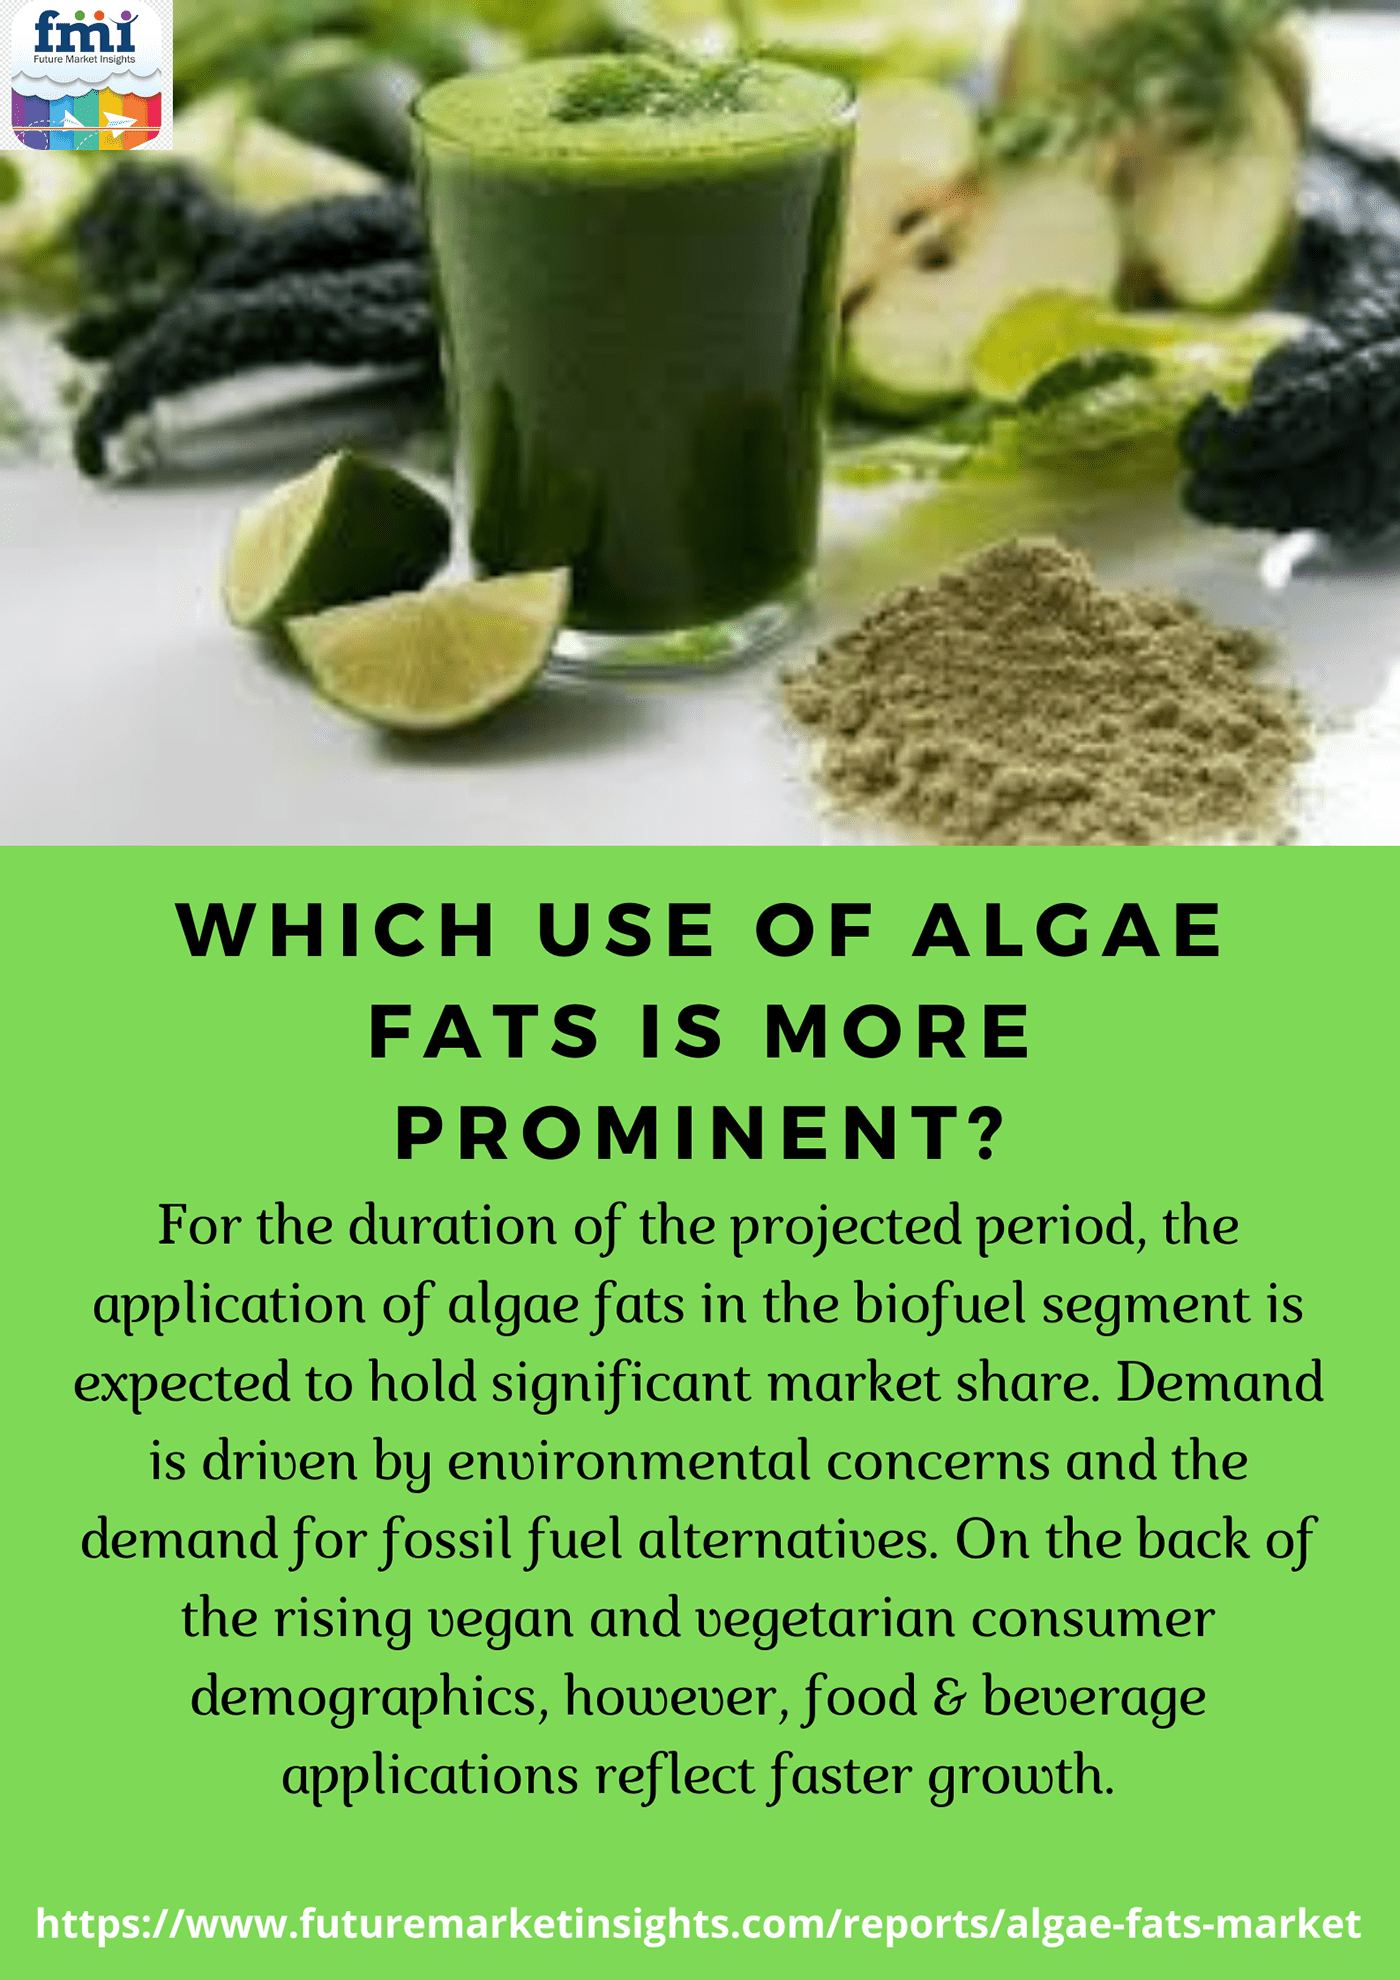 Algae Fats Market dietary supplements Global Algae Fats Market greenhouse gas emissions Nutraceutical Products